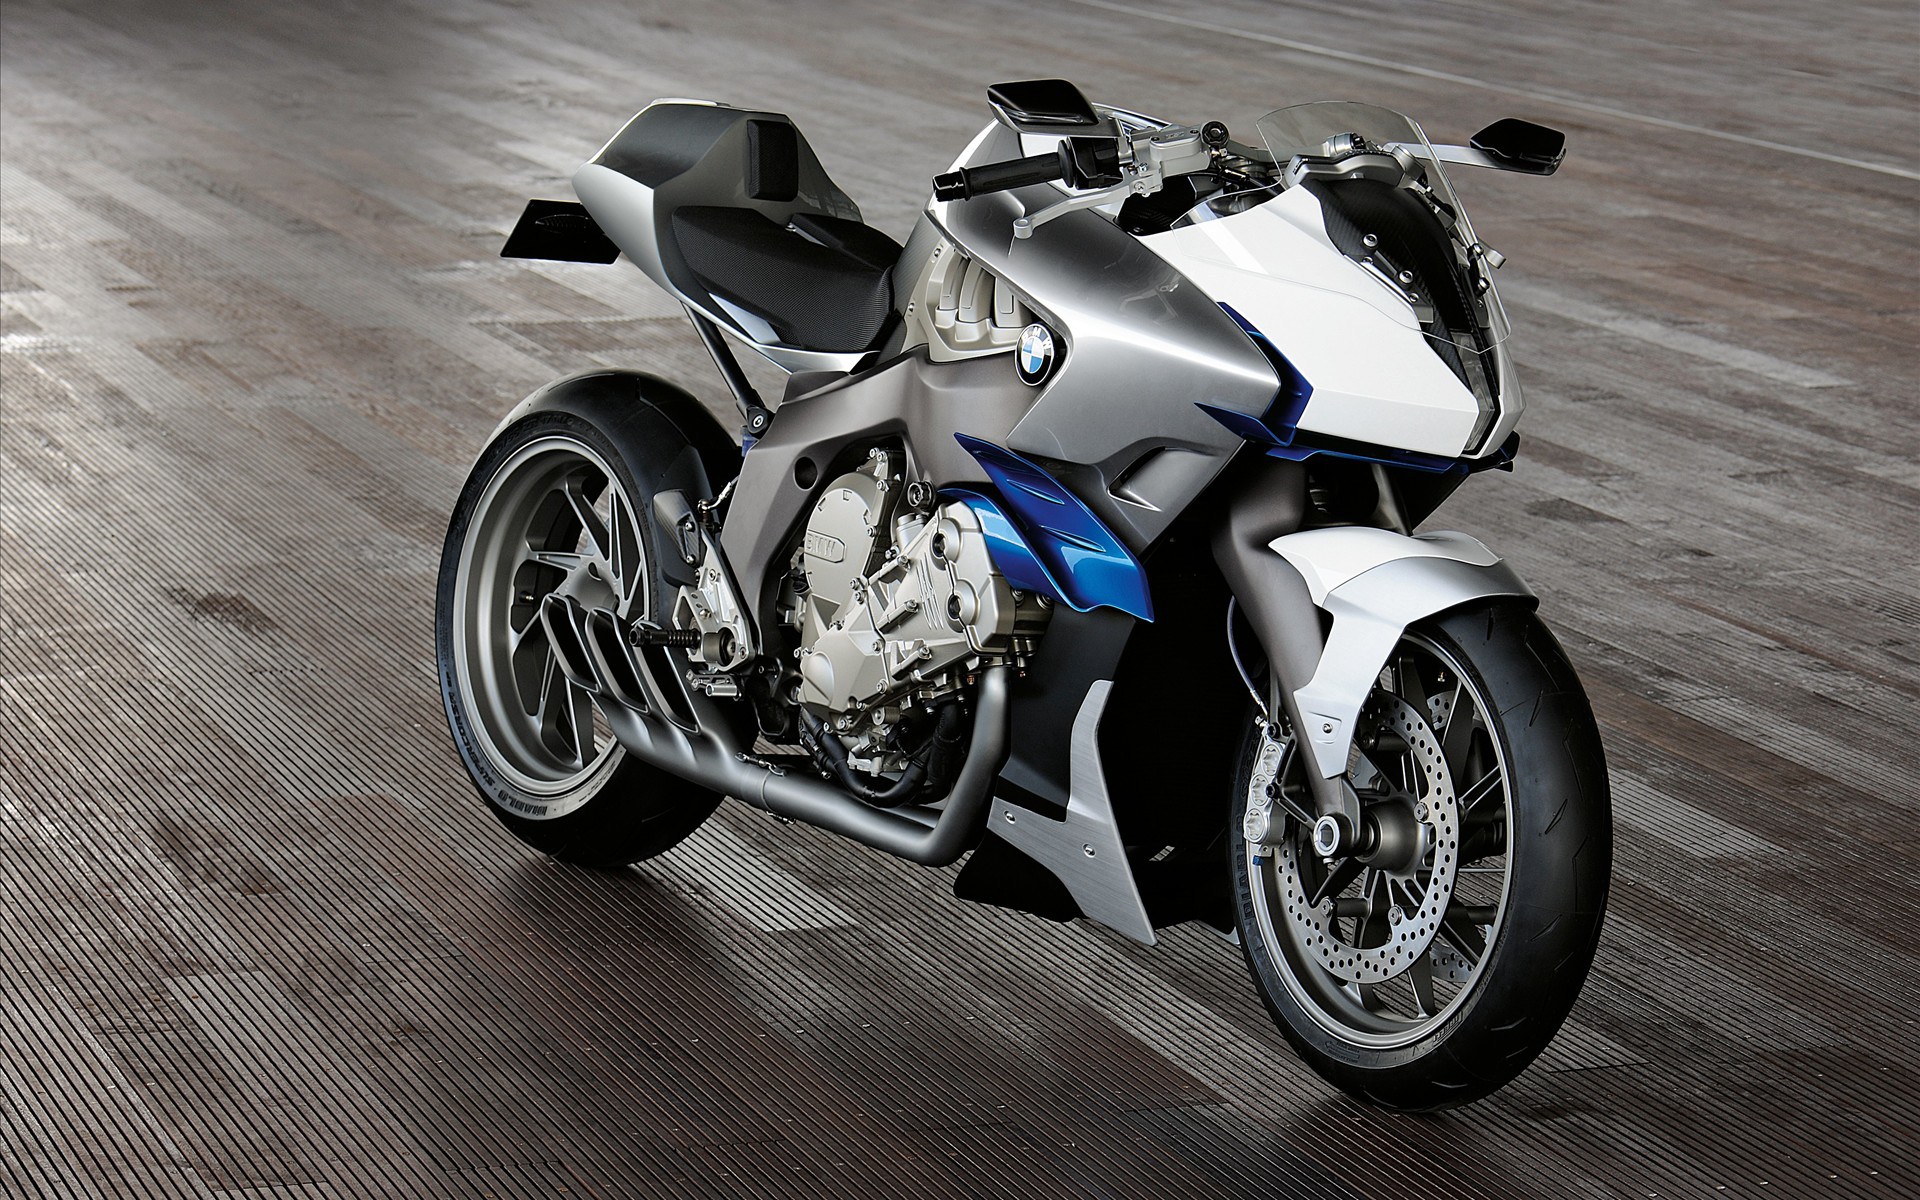 Here We Are Sharing Bmw Motorcycles HD Wallpaper For Desktop You